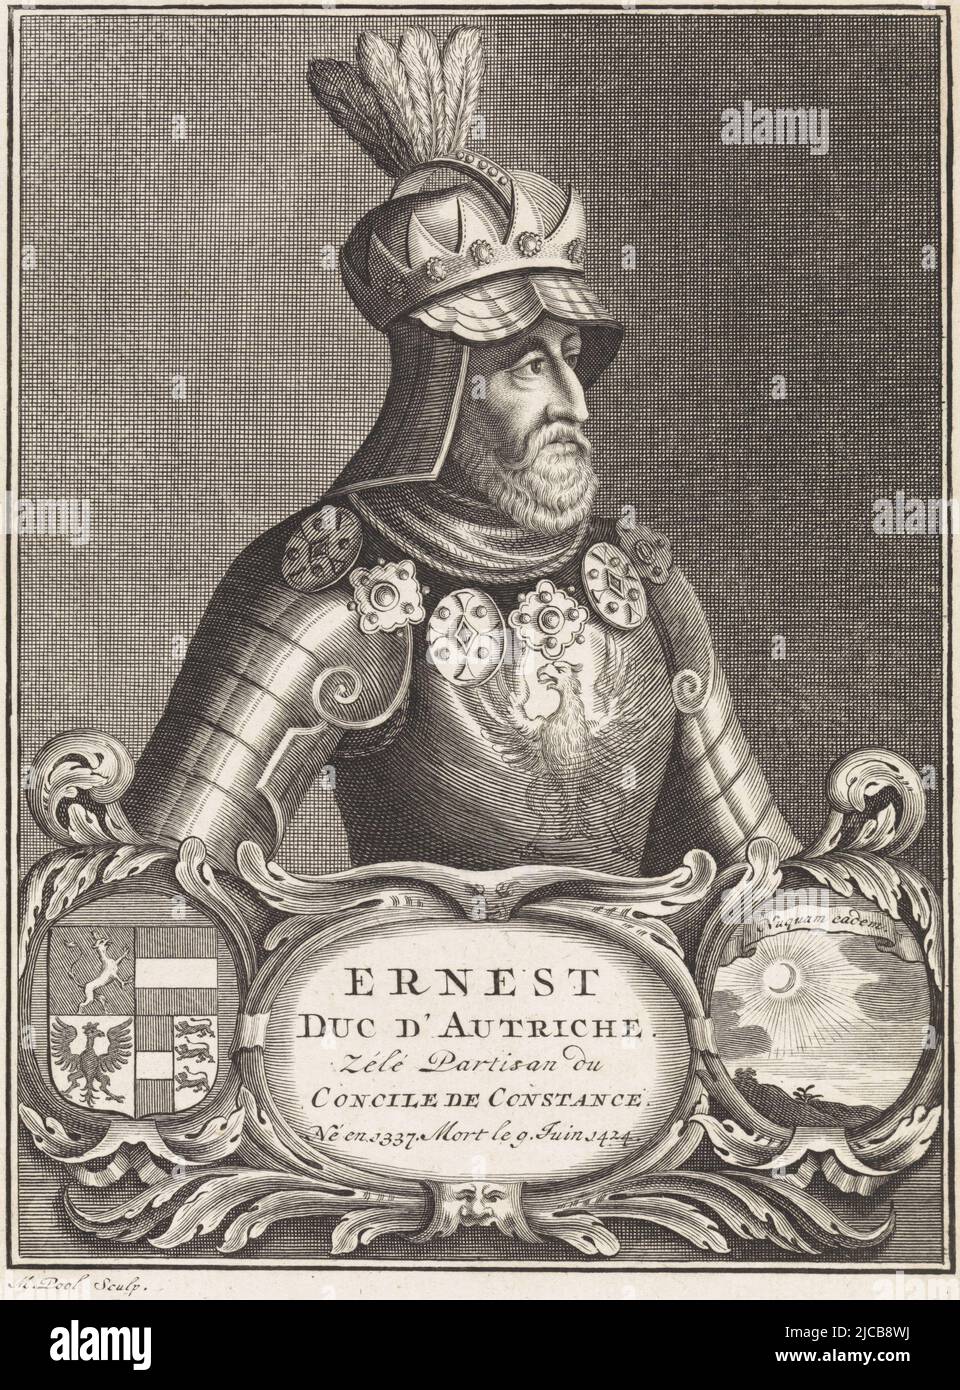 Portrait of Ernst I of Habsburg, Archduke of Austria The cartouche below his portrait is flanked by his coat of arms and a depiction of a landscape with a crescent moon, Portrait of Ernst I of Habsburg, Archduke of Austria, print maker: Matthijs Pool, (mentioned on object), Amsterdam, 1727, paper, engraving, etching, h 205 mm × w 149 mm Stock Photo